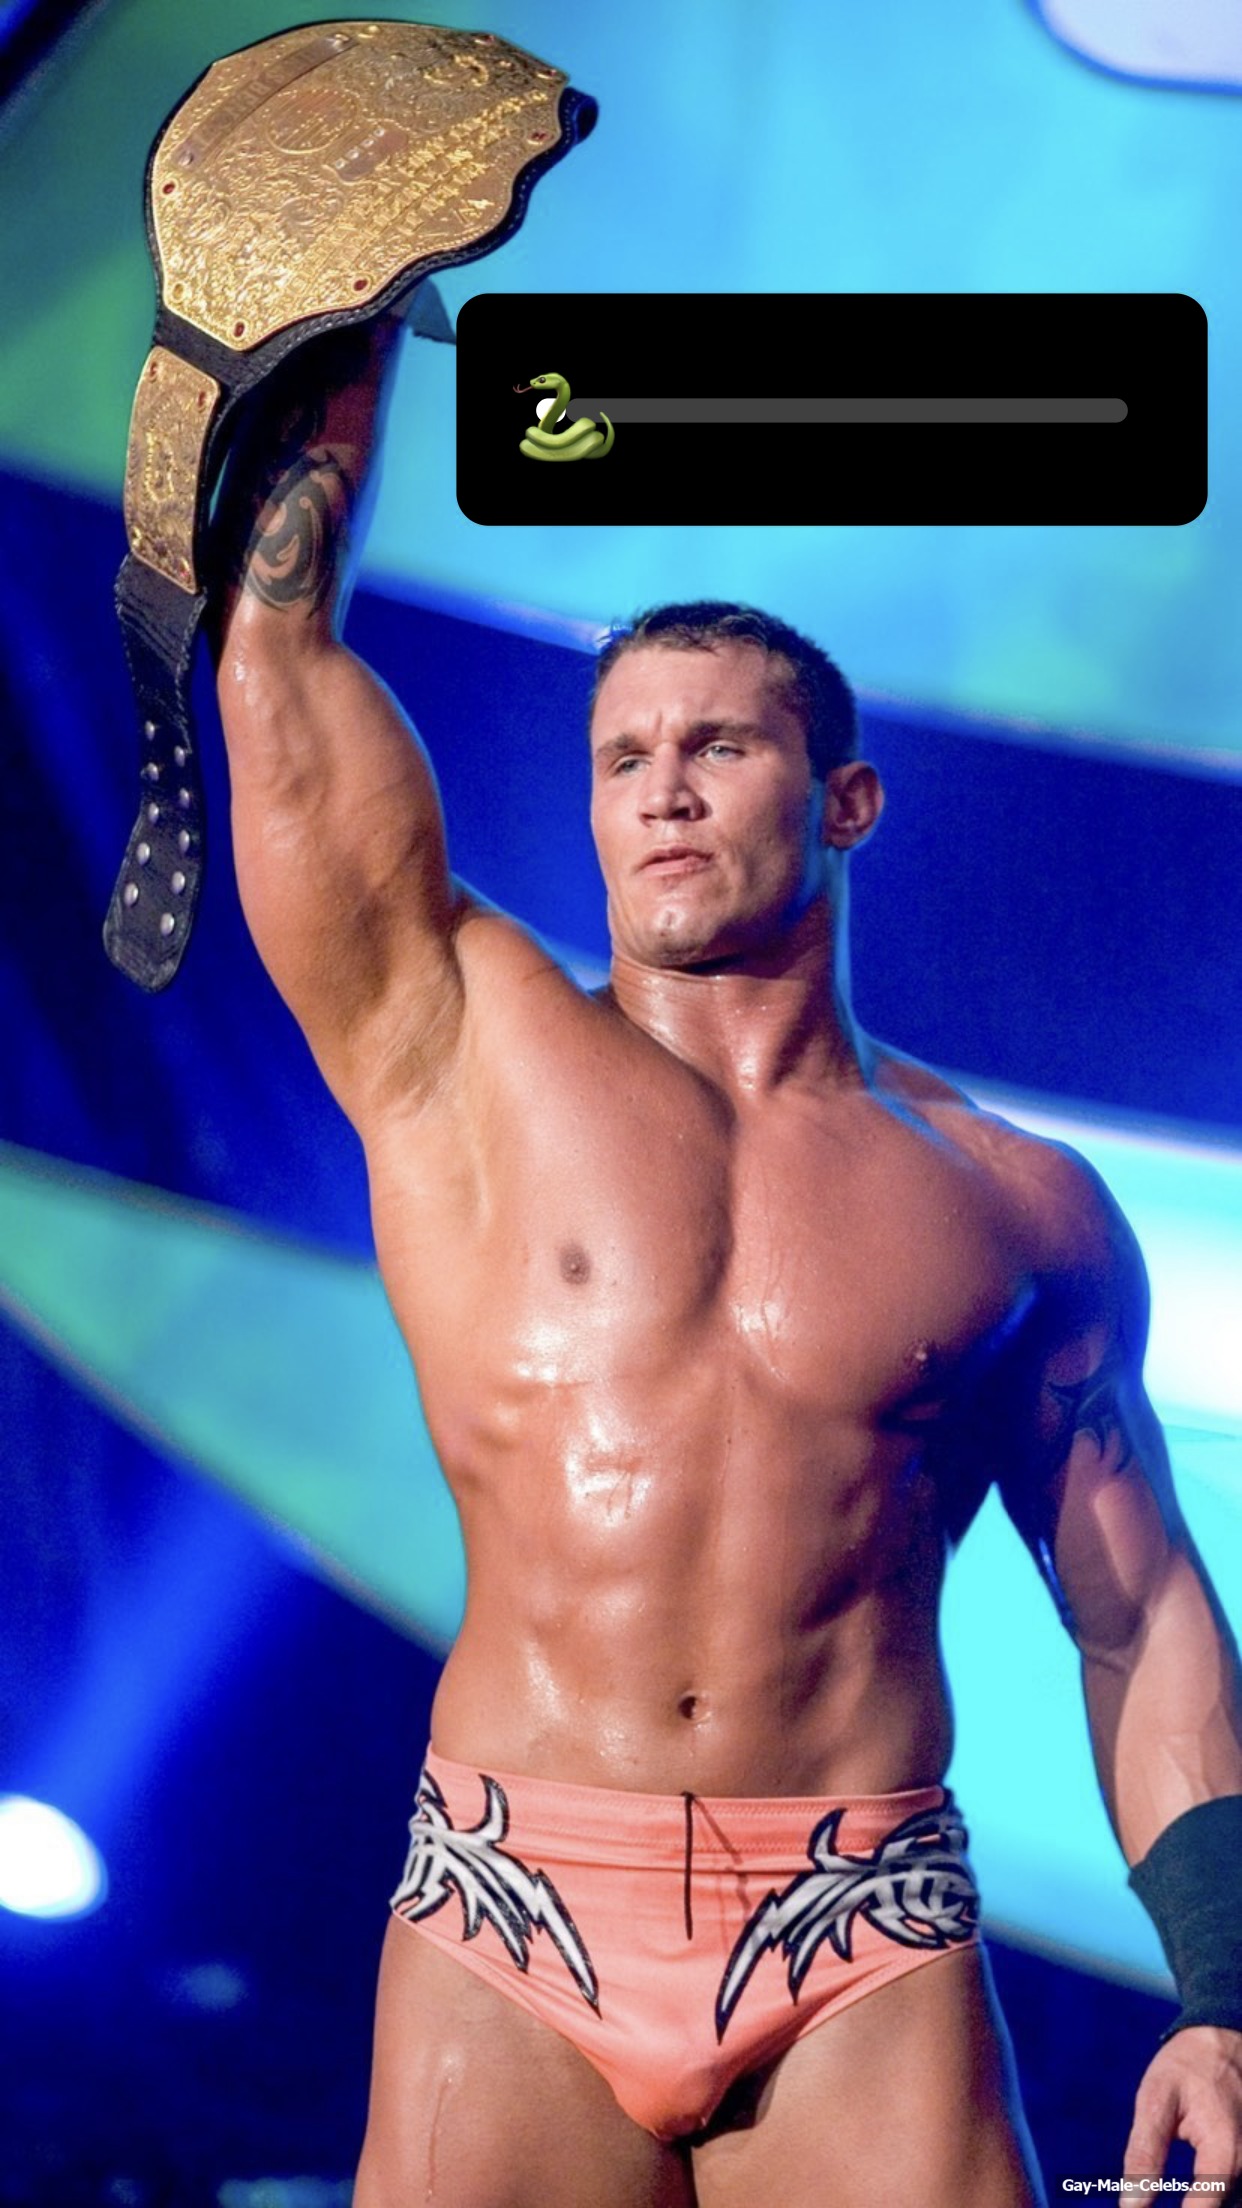 Free Randy Orton Cut Cock In Wet Trunks & Nude Ass | The Gay Gay.